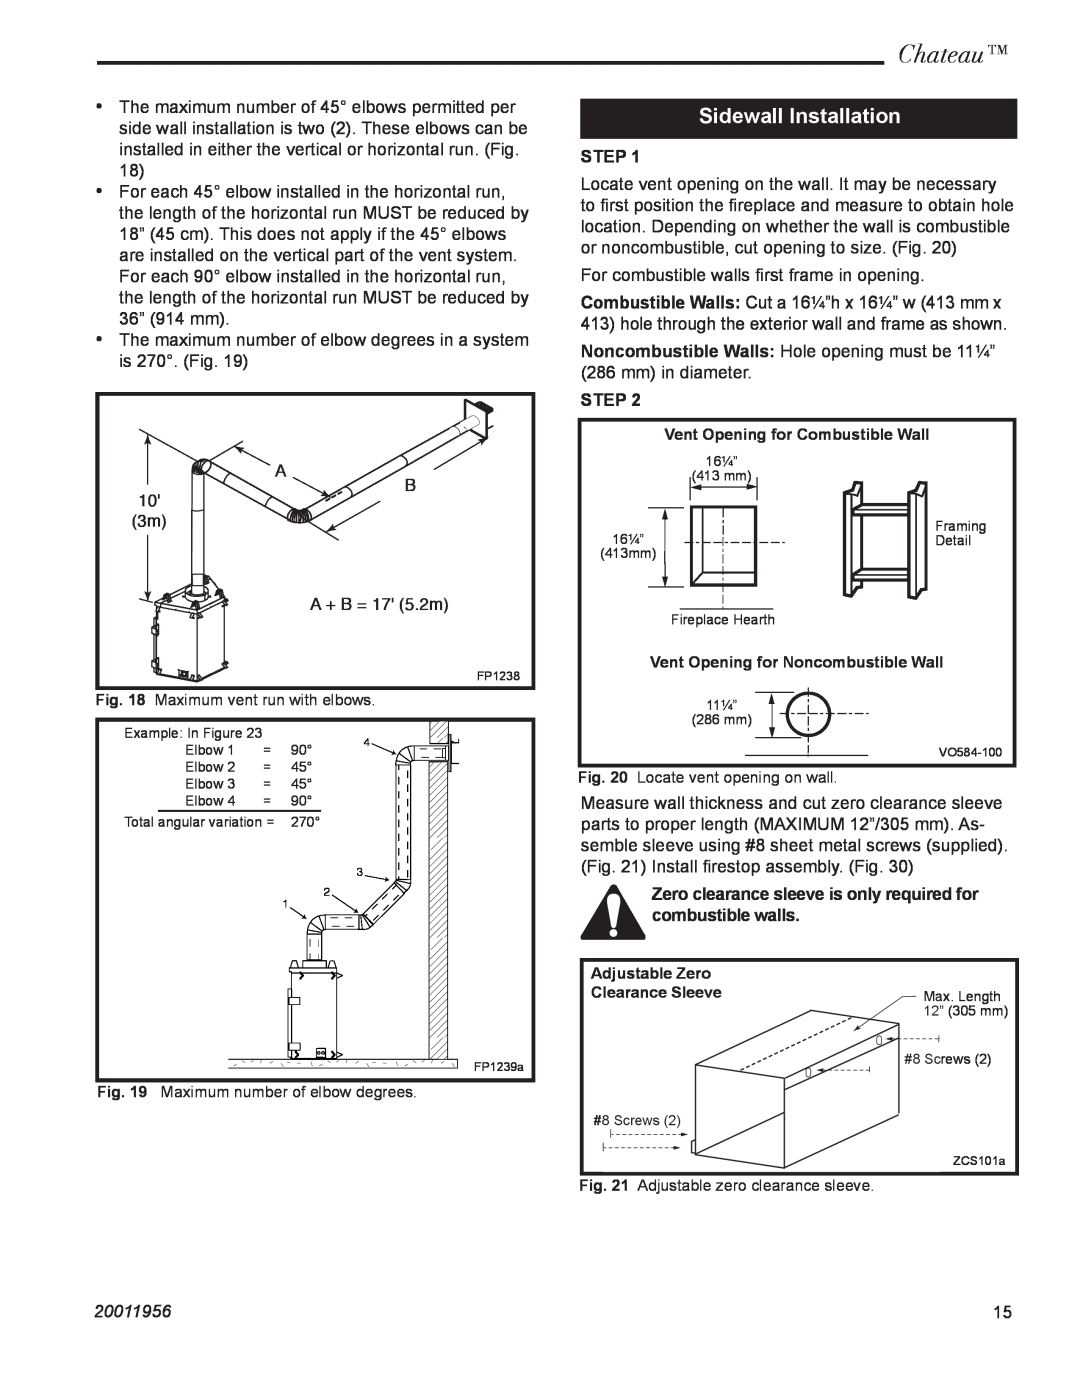 Vermont Casting DVT44 installation instructions Sidewall Installation, Chateau, Step, 20011956 